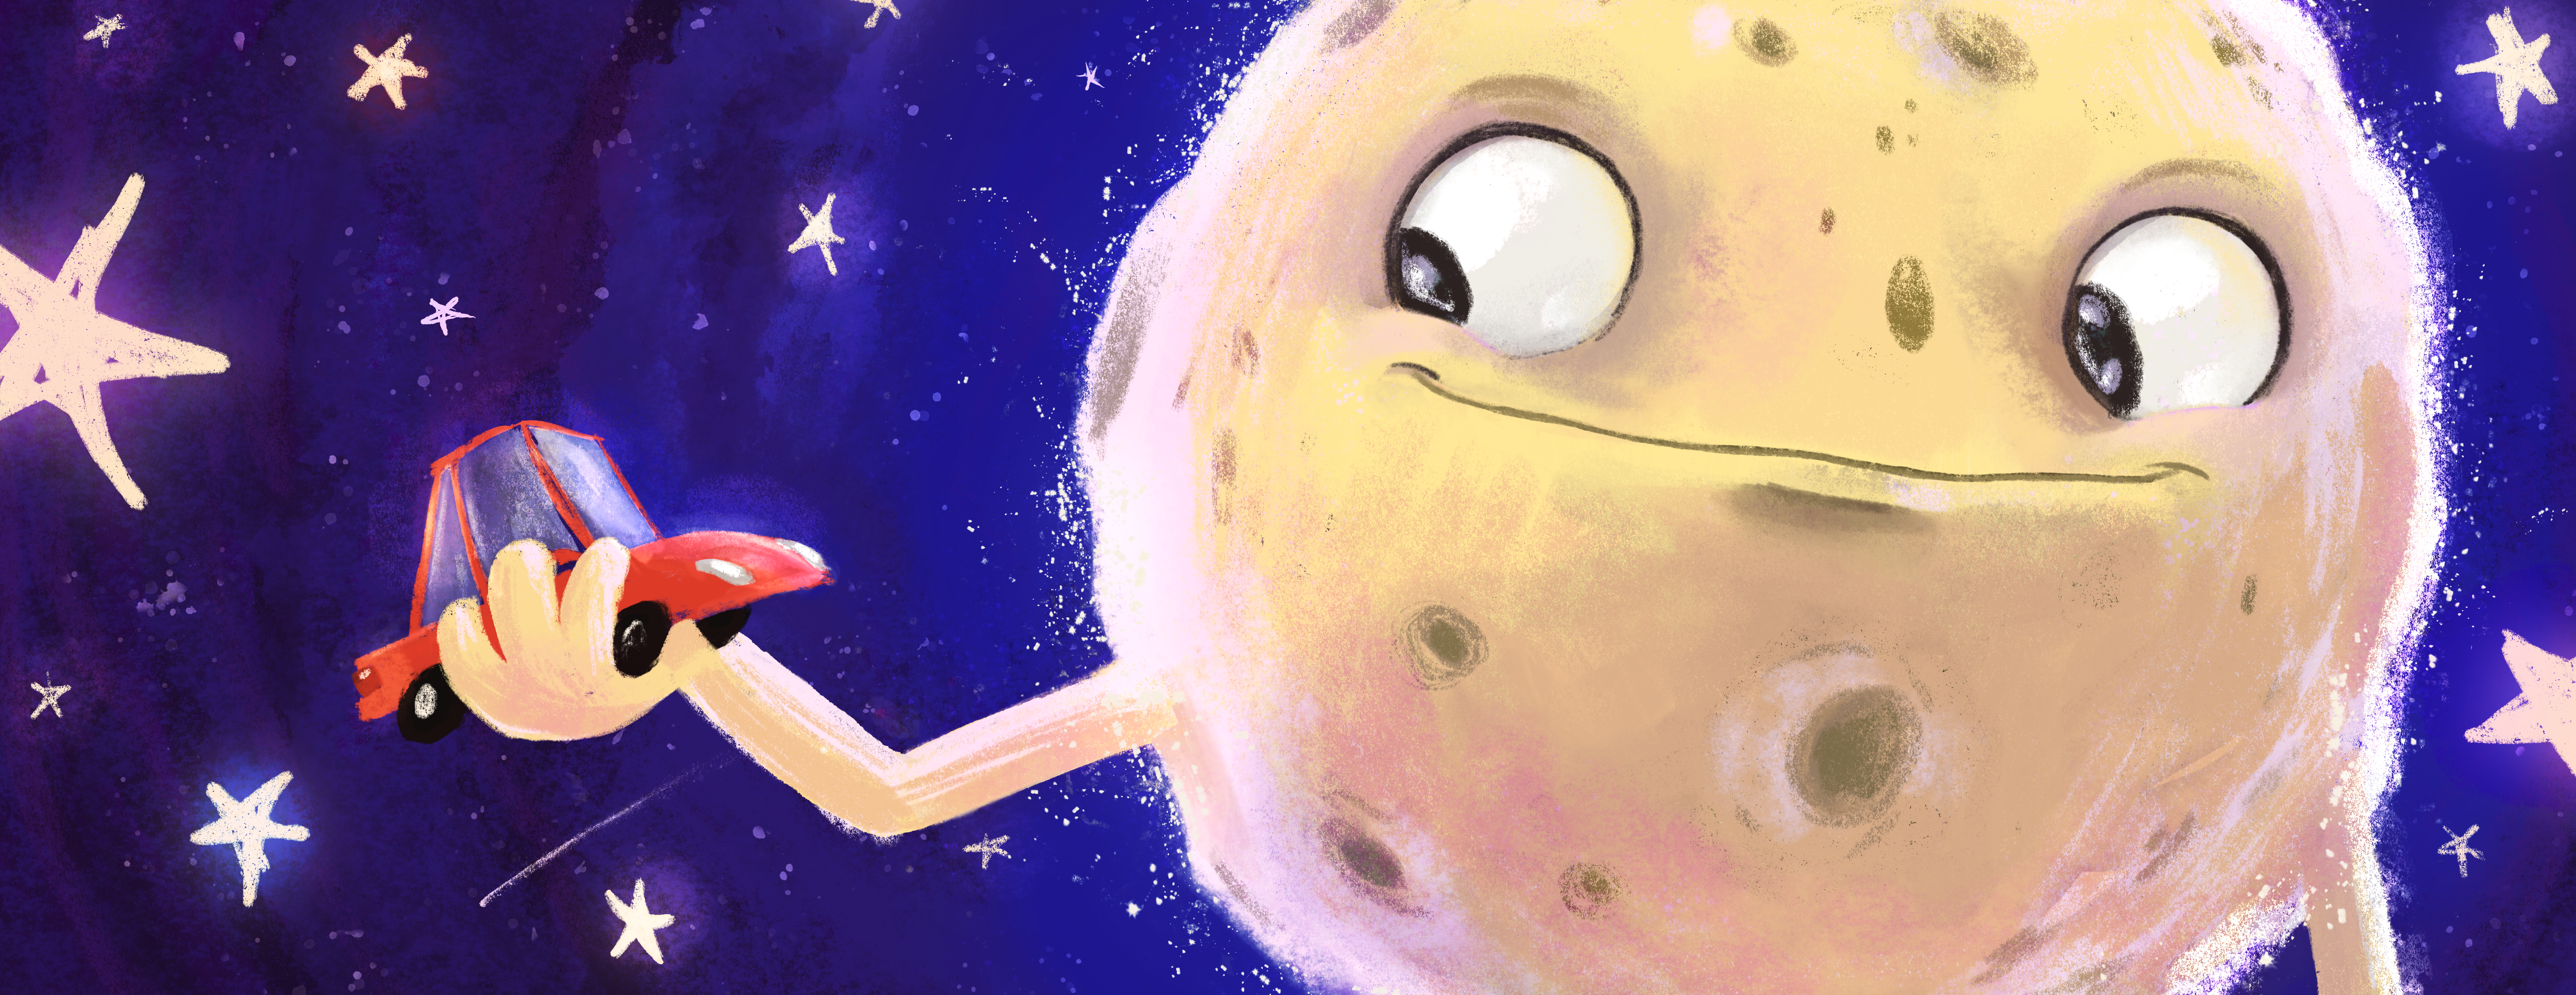 The Moon – Journey to the Moon Children’s Book Concept